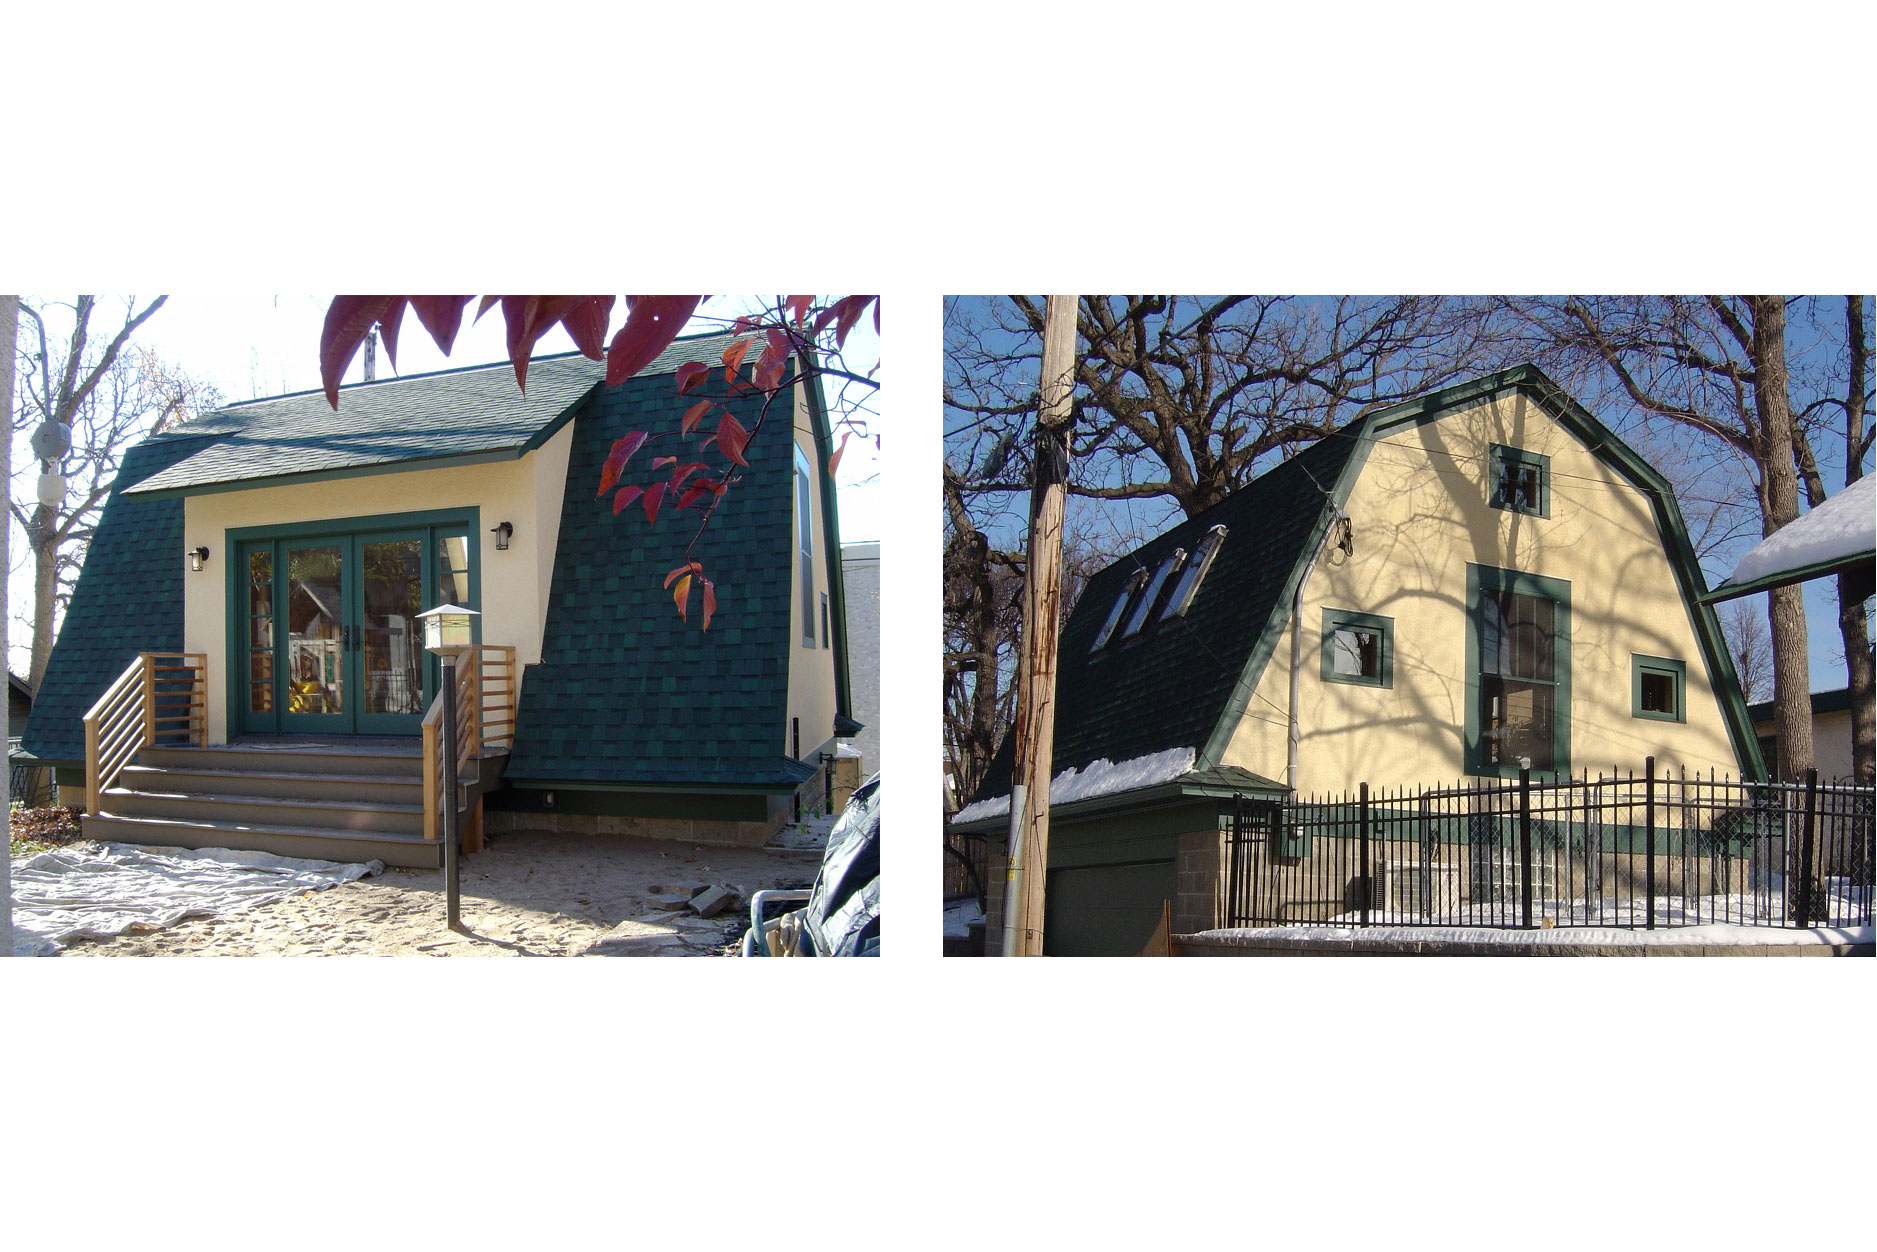 Exterior from Backyard (left) & Exterior from Alley (right) near the end of construction